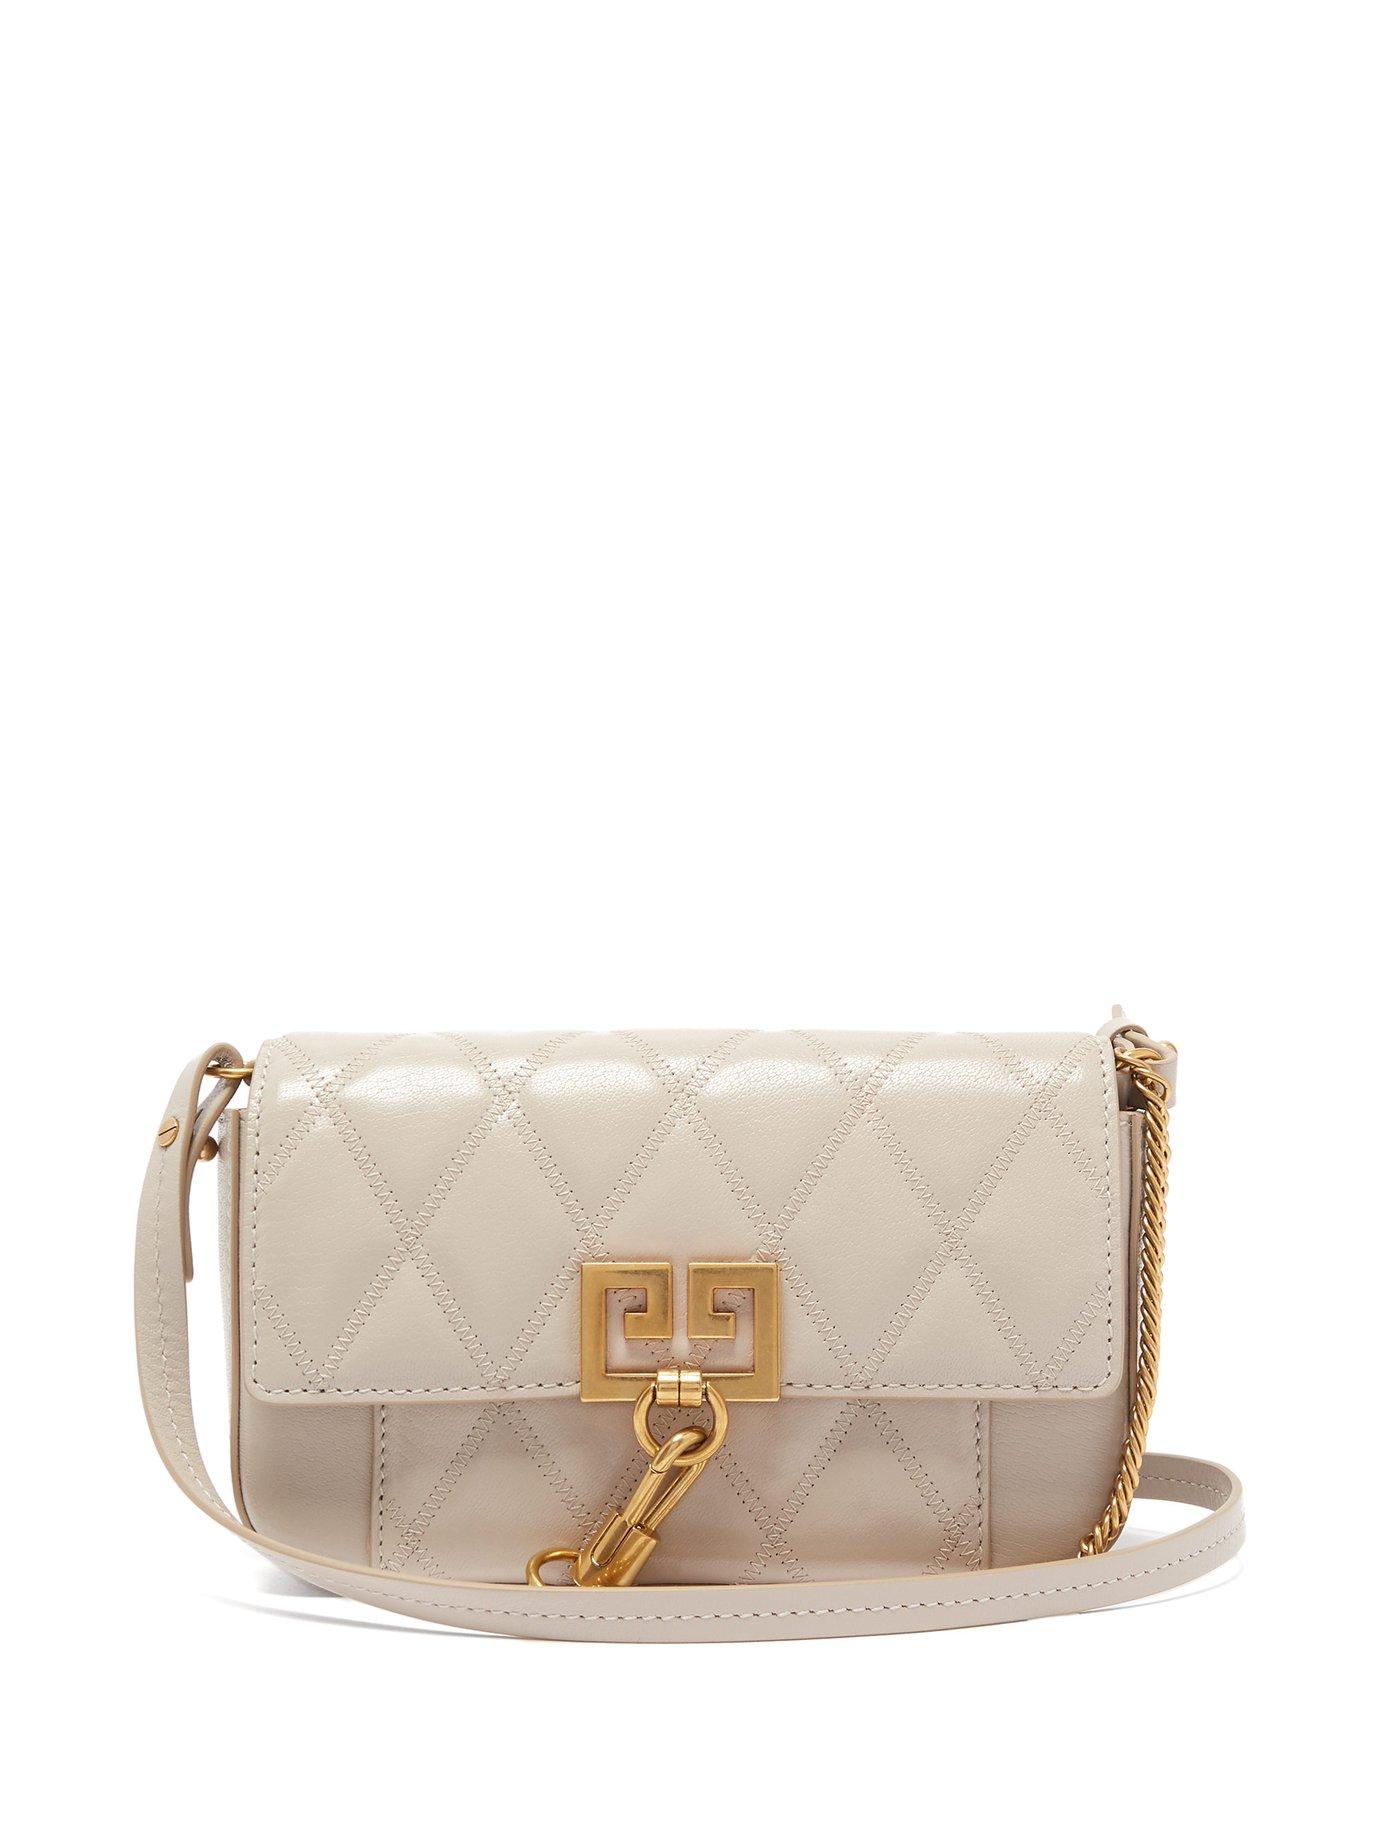 Givenchy Mini Pocket Bag Diamond Quilted Leather Natural in Gray - Lyst